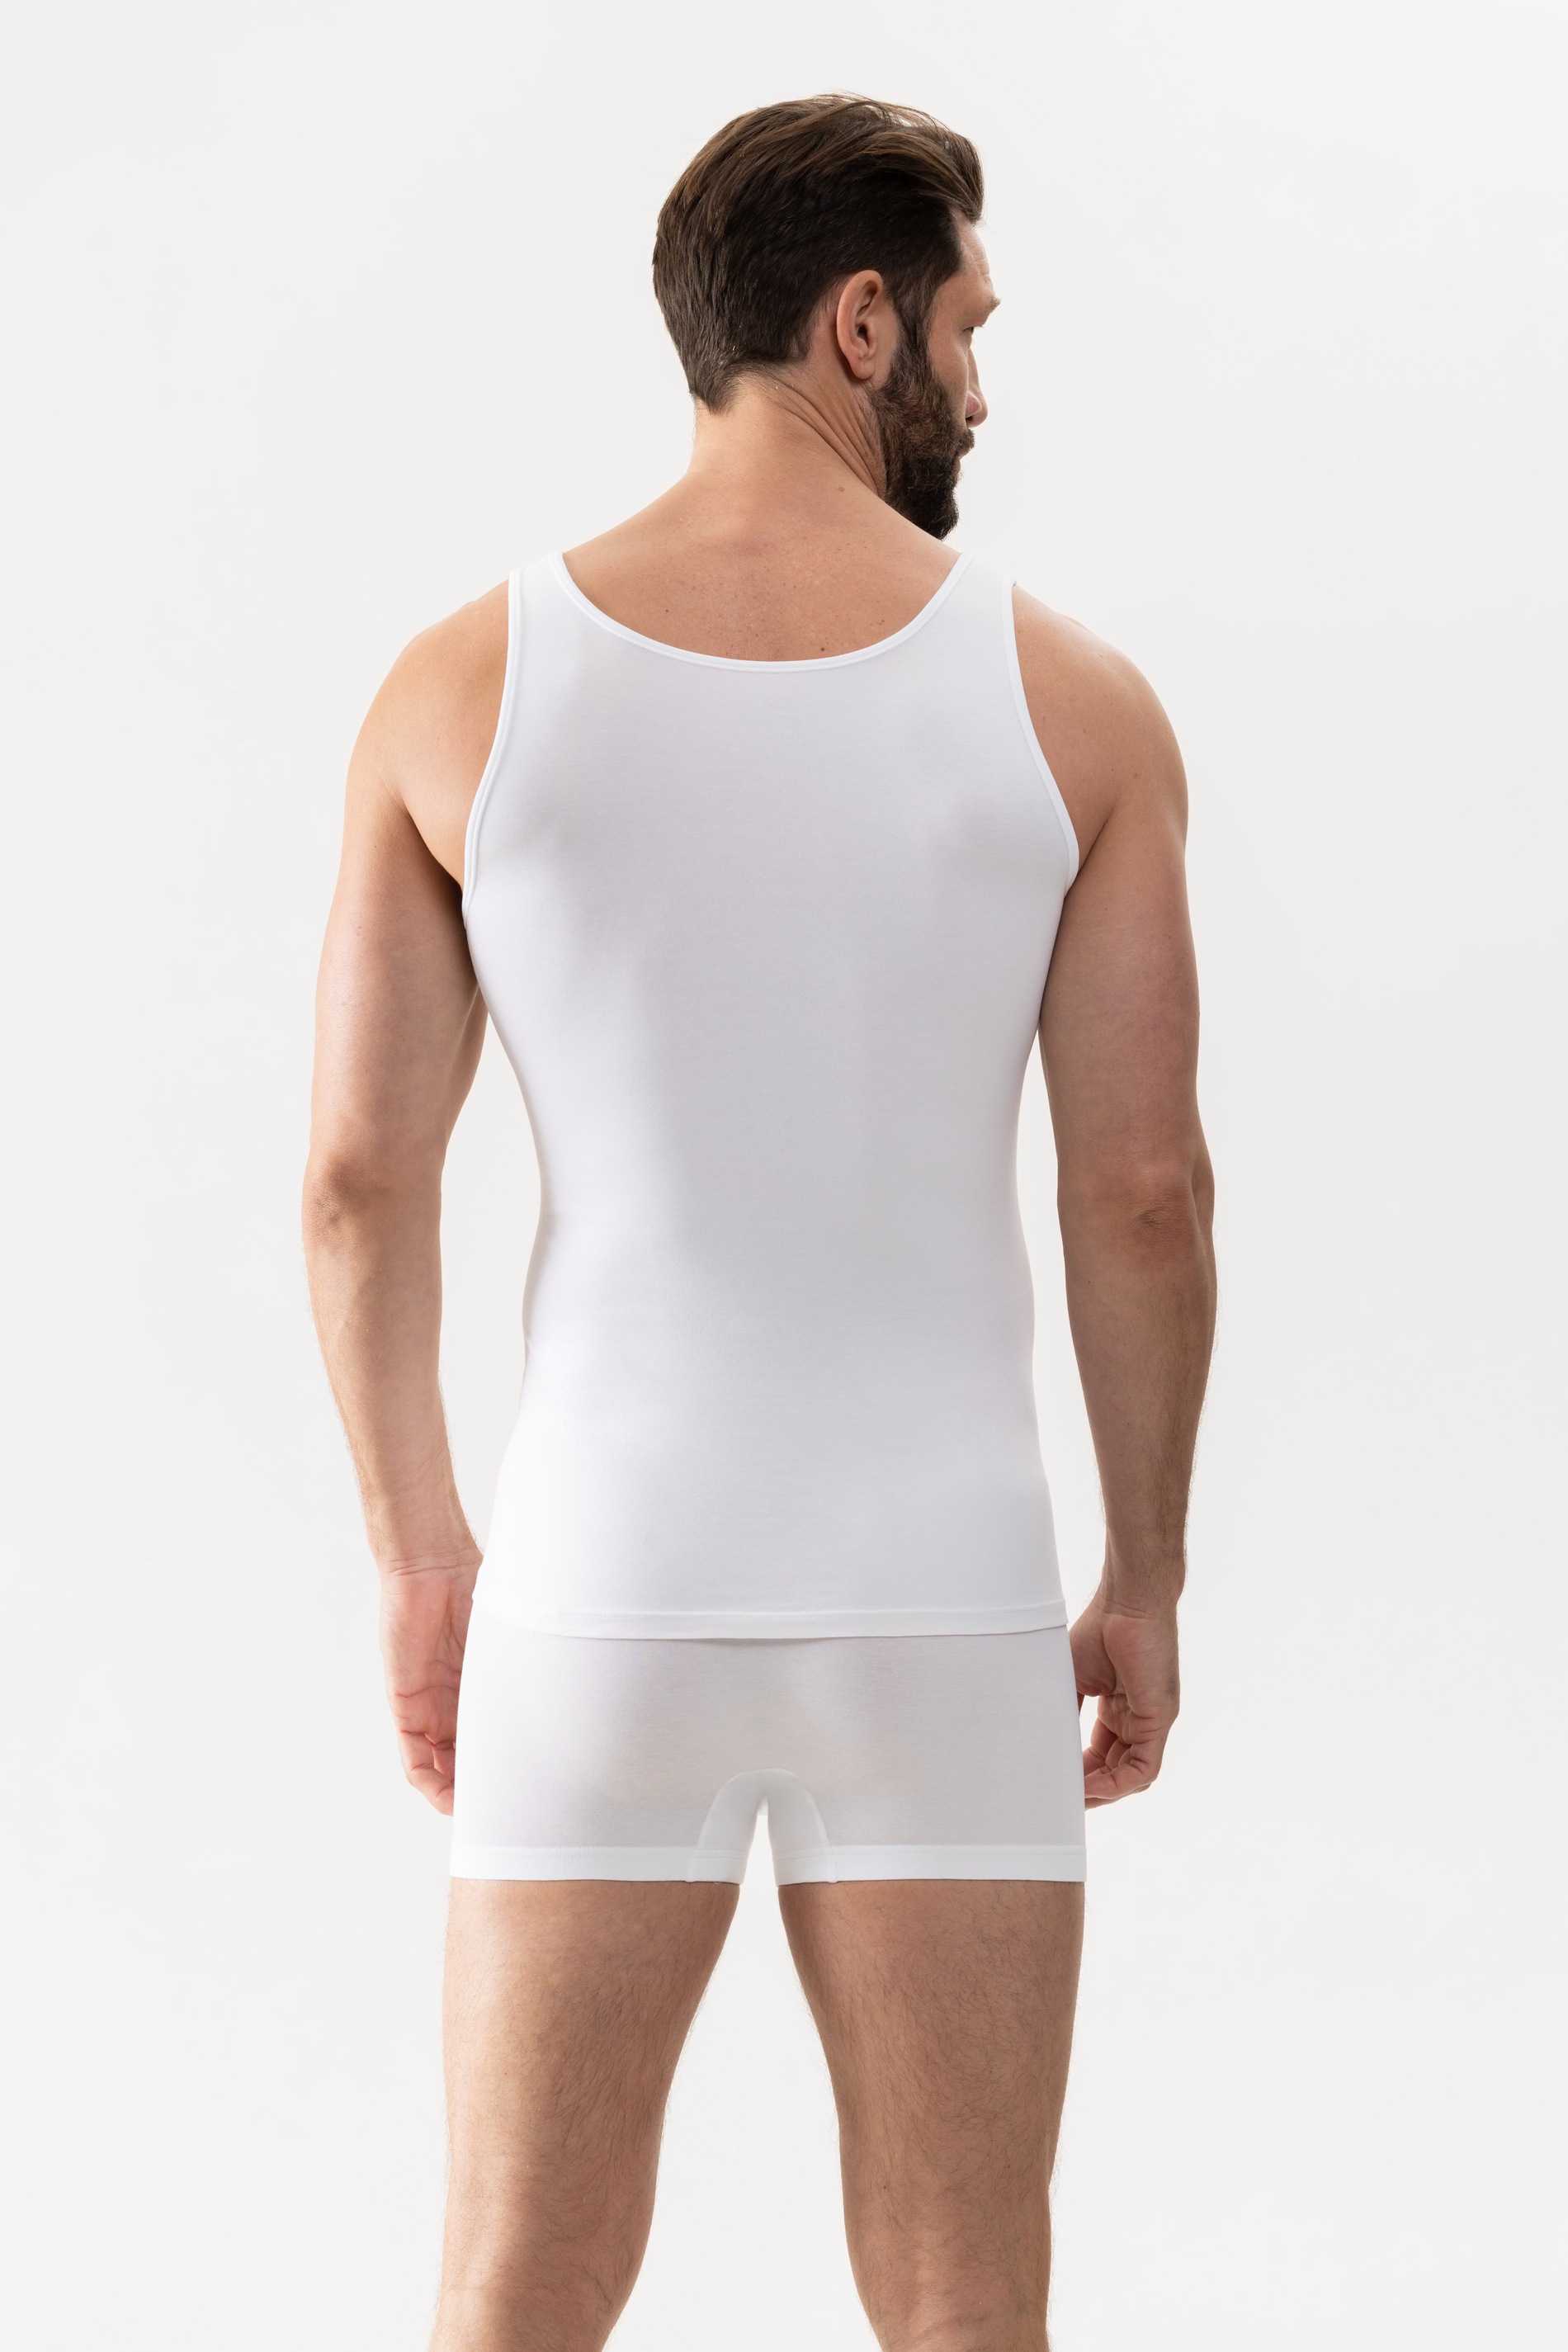 Athletic-Shirt White Serie Software Rear View | mey®